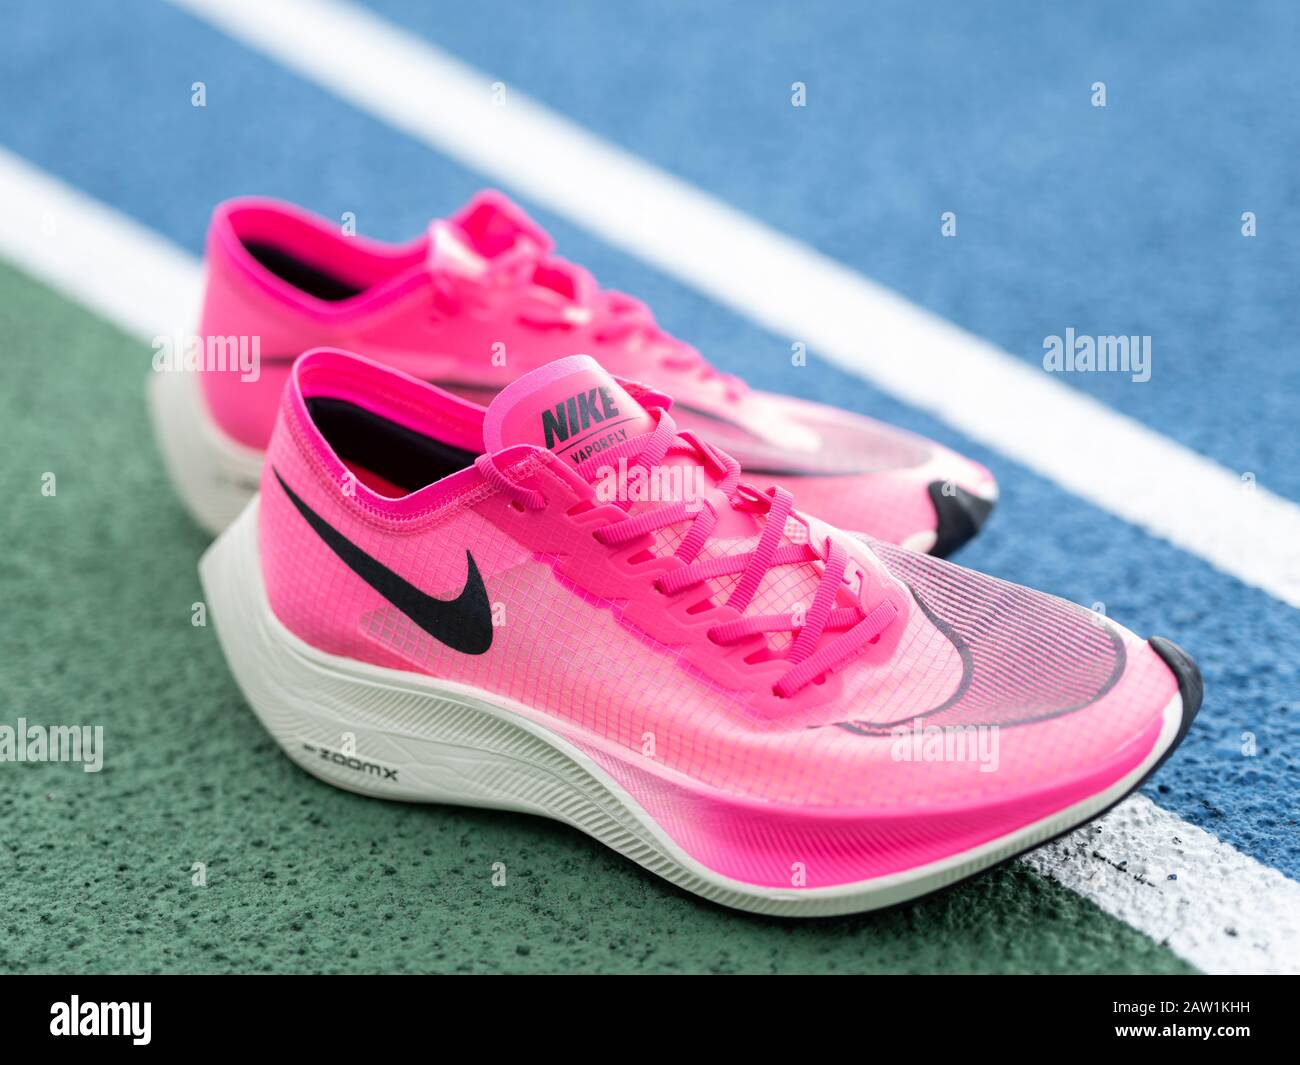 Nike ZoomX Vaporfly Next% running shoe in pink (Pink Blast/Guava Ice/Black)  record-breaking shoe carbon aero Stock Photo - Alamy